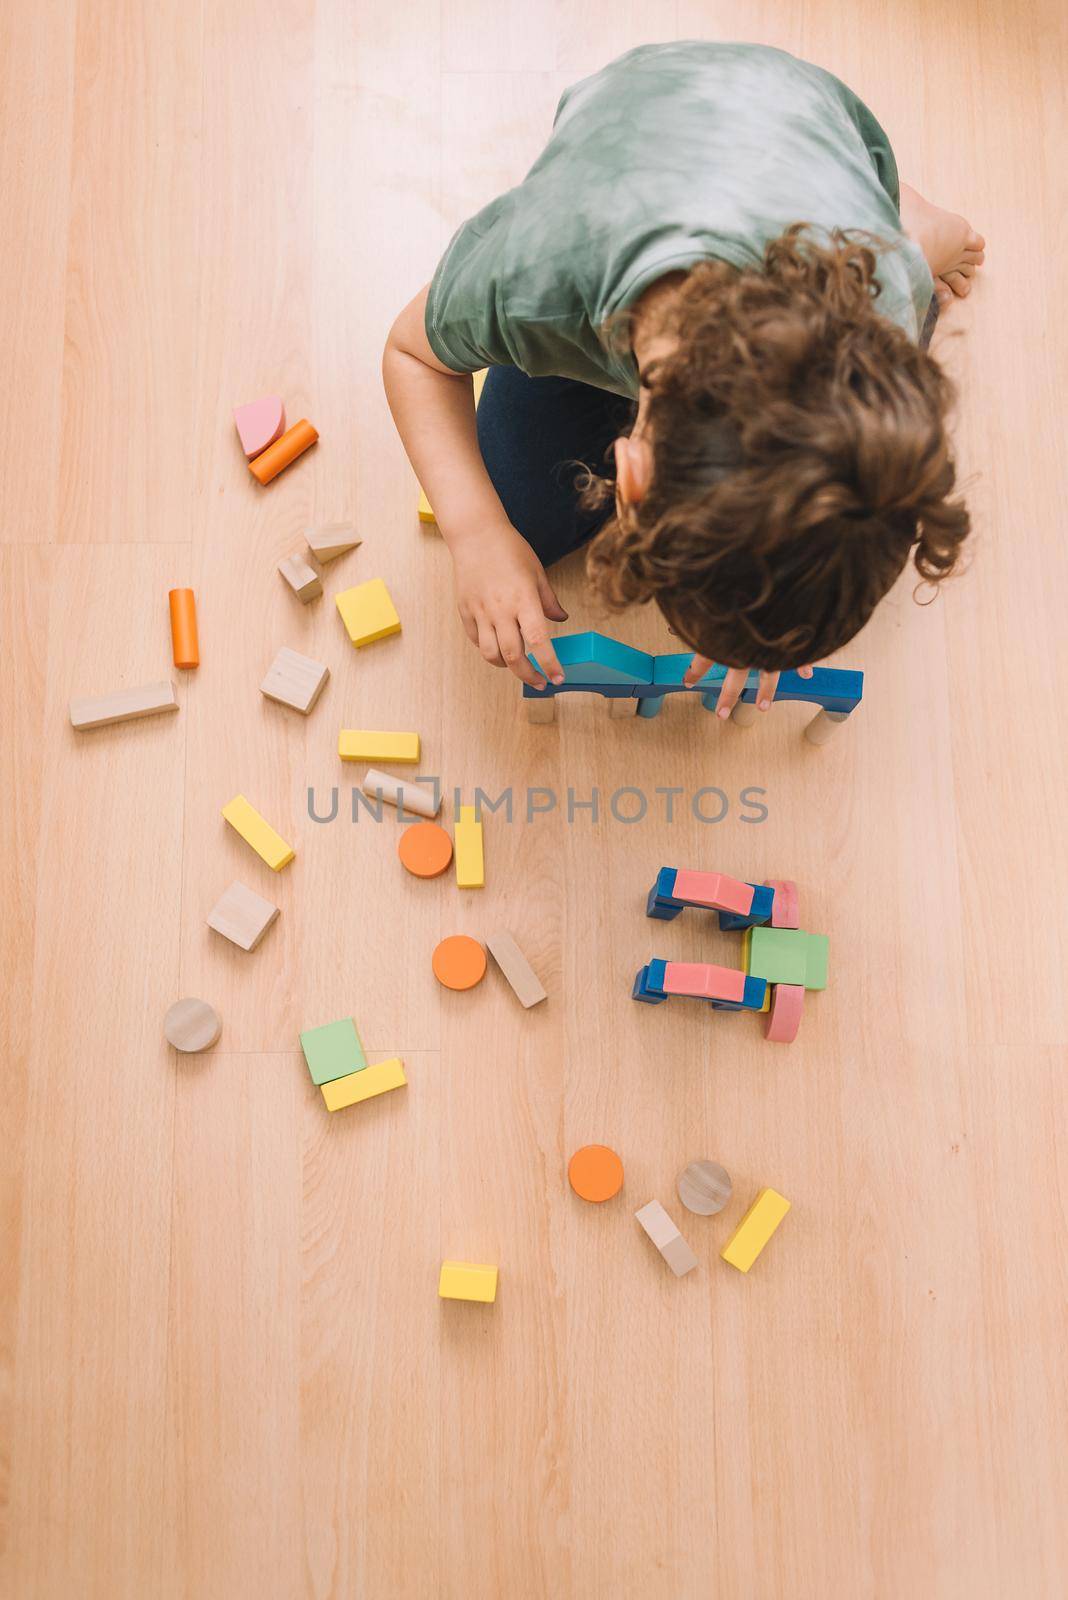 top view of a little girl playing in the floor with colorful wooden building block toys at home or kindergarten, educational toys for creative children